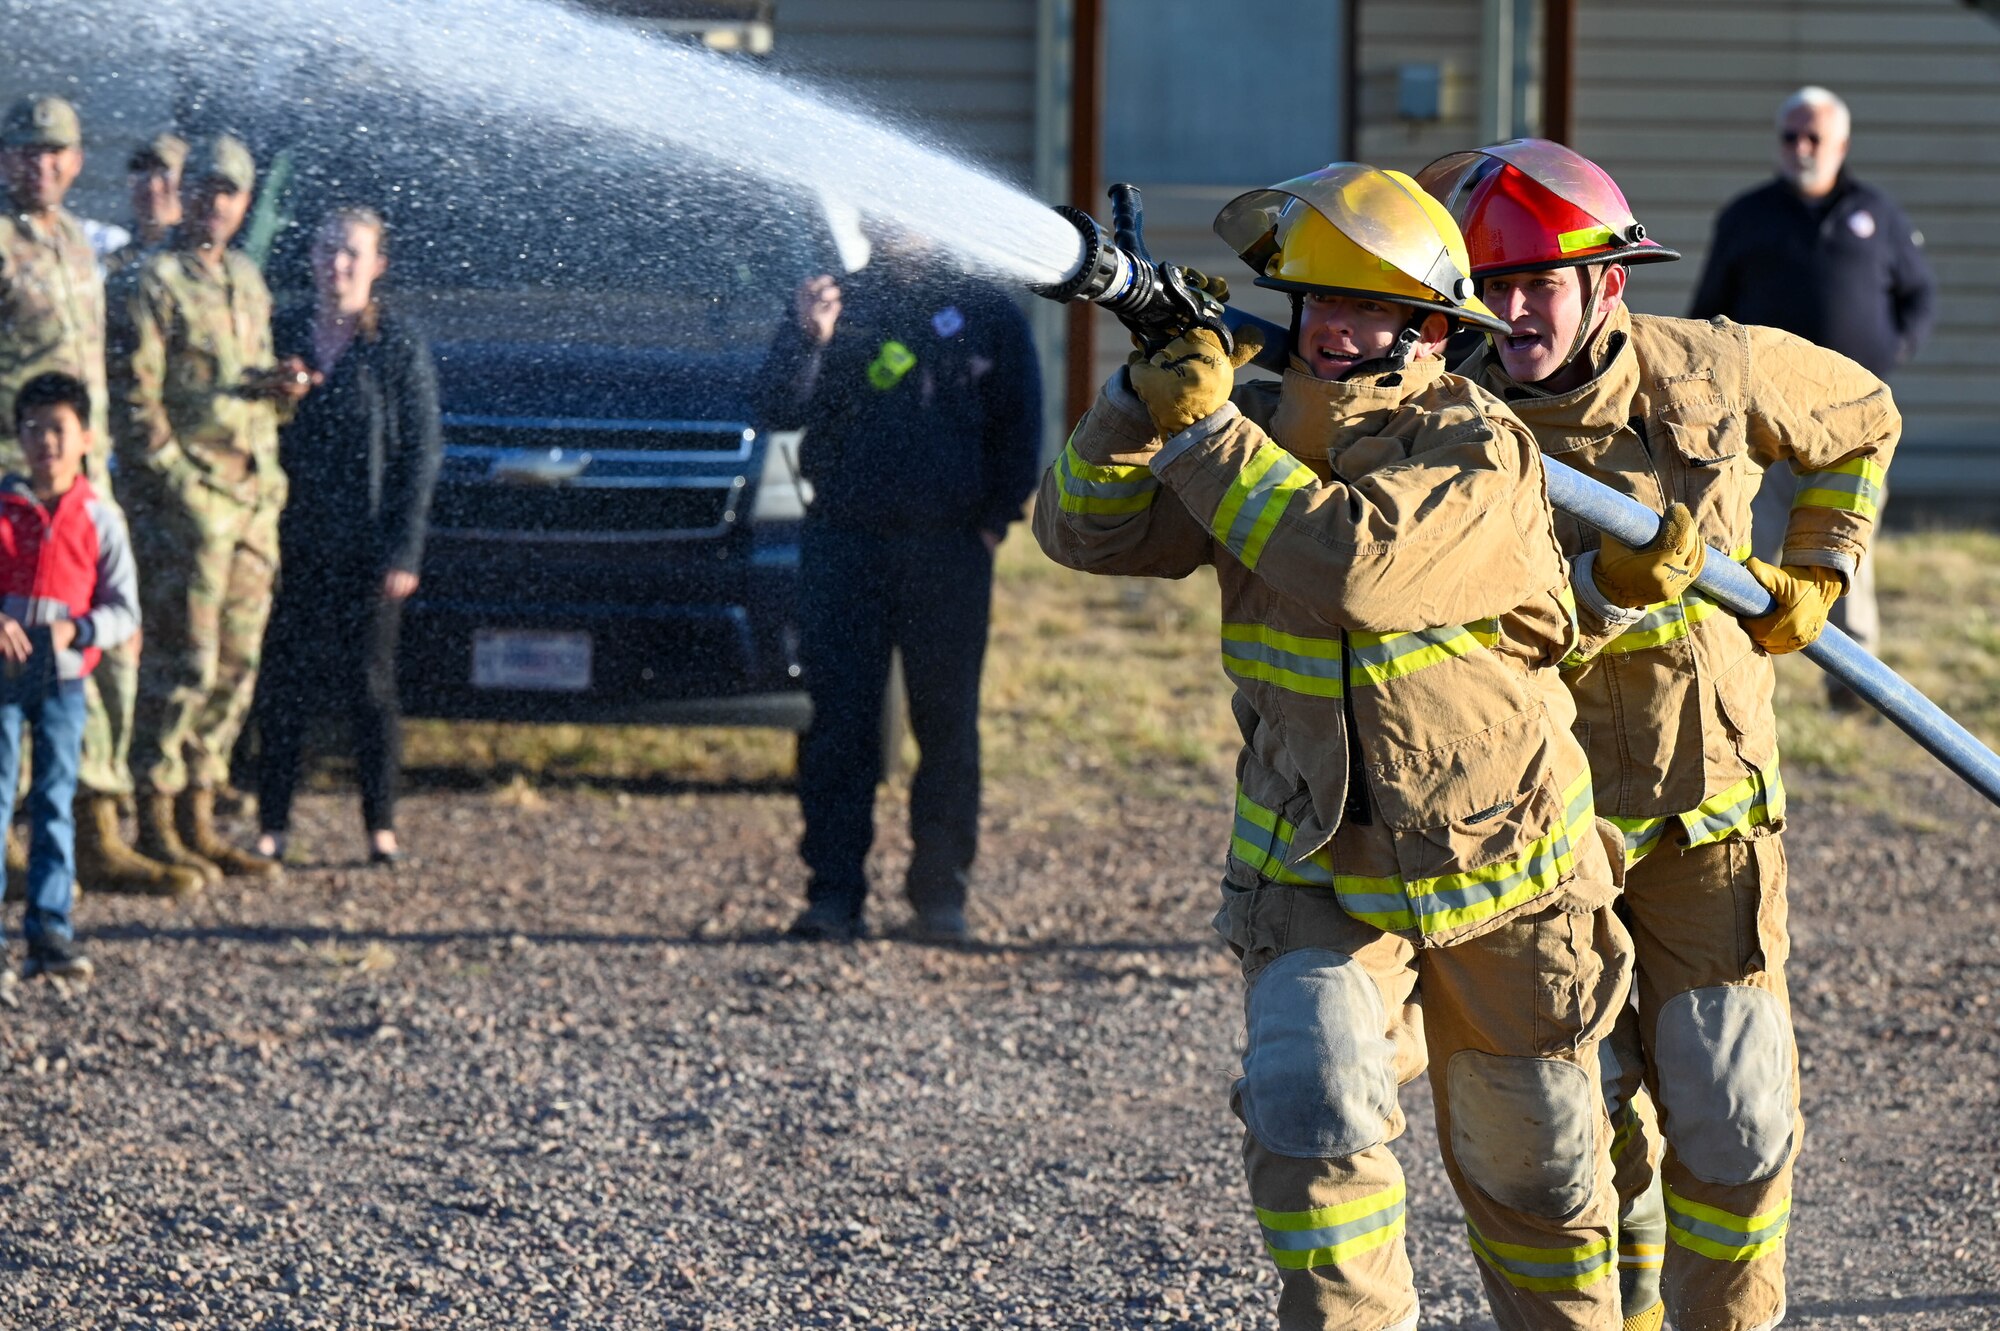 From left, U.S. Air Force Master Sgt. Nicholas Tester, 97th Training Squadron (TRS) first sergeant, and Lt. Col. Benjamin Davidson, 97th TRS commander, participate in a challenge as part of Fire Prevention Week at Altus Air Force Base, Oklahoma, Oct. 13, 2022. The challenge gives an opportunity for squadron commanders and first sergeants to experience what a firefighter does. (U.S. Air Force photo by Senior Airman Kayla Christenson)